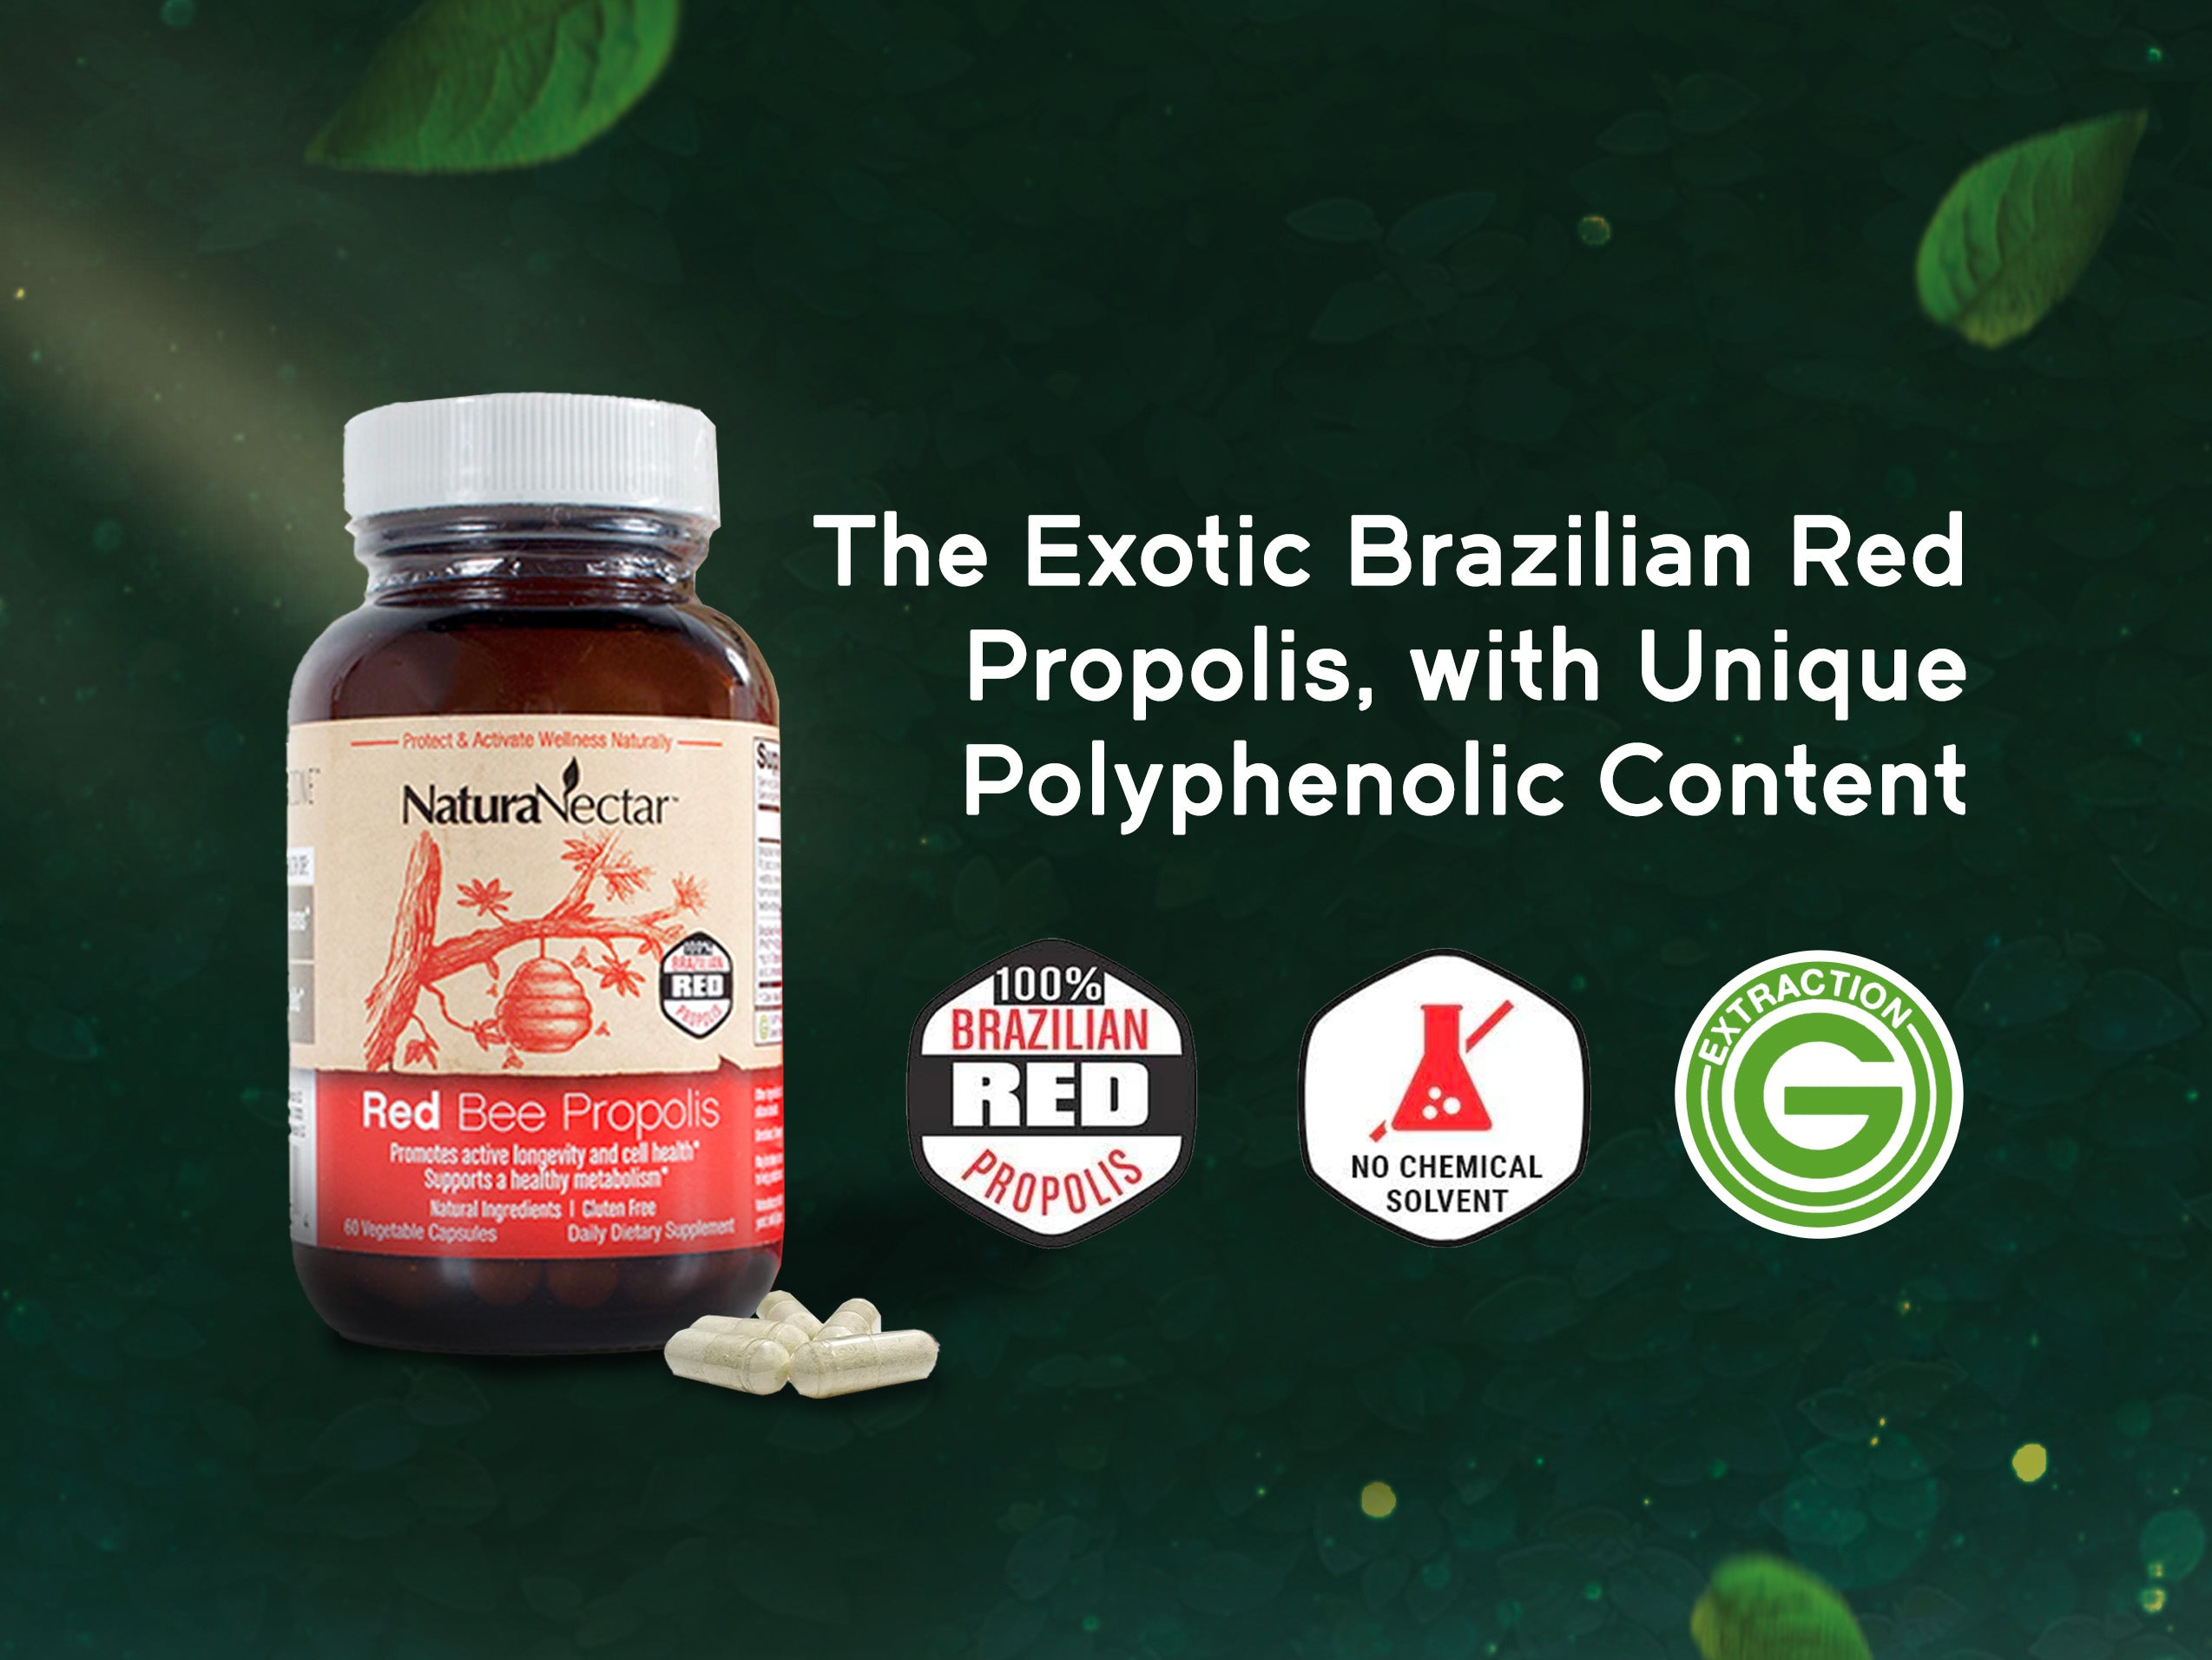 Red Bee Propolis - Supports your metabolism*, longevity & cell health* through exclusive polyphenols and antioxidants from our own bee farms in Brazil